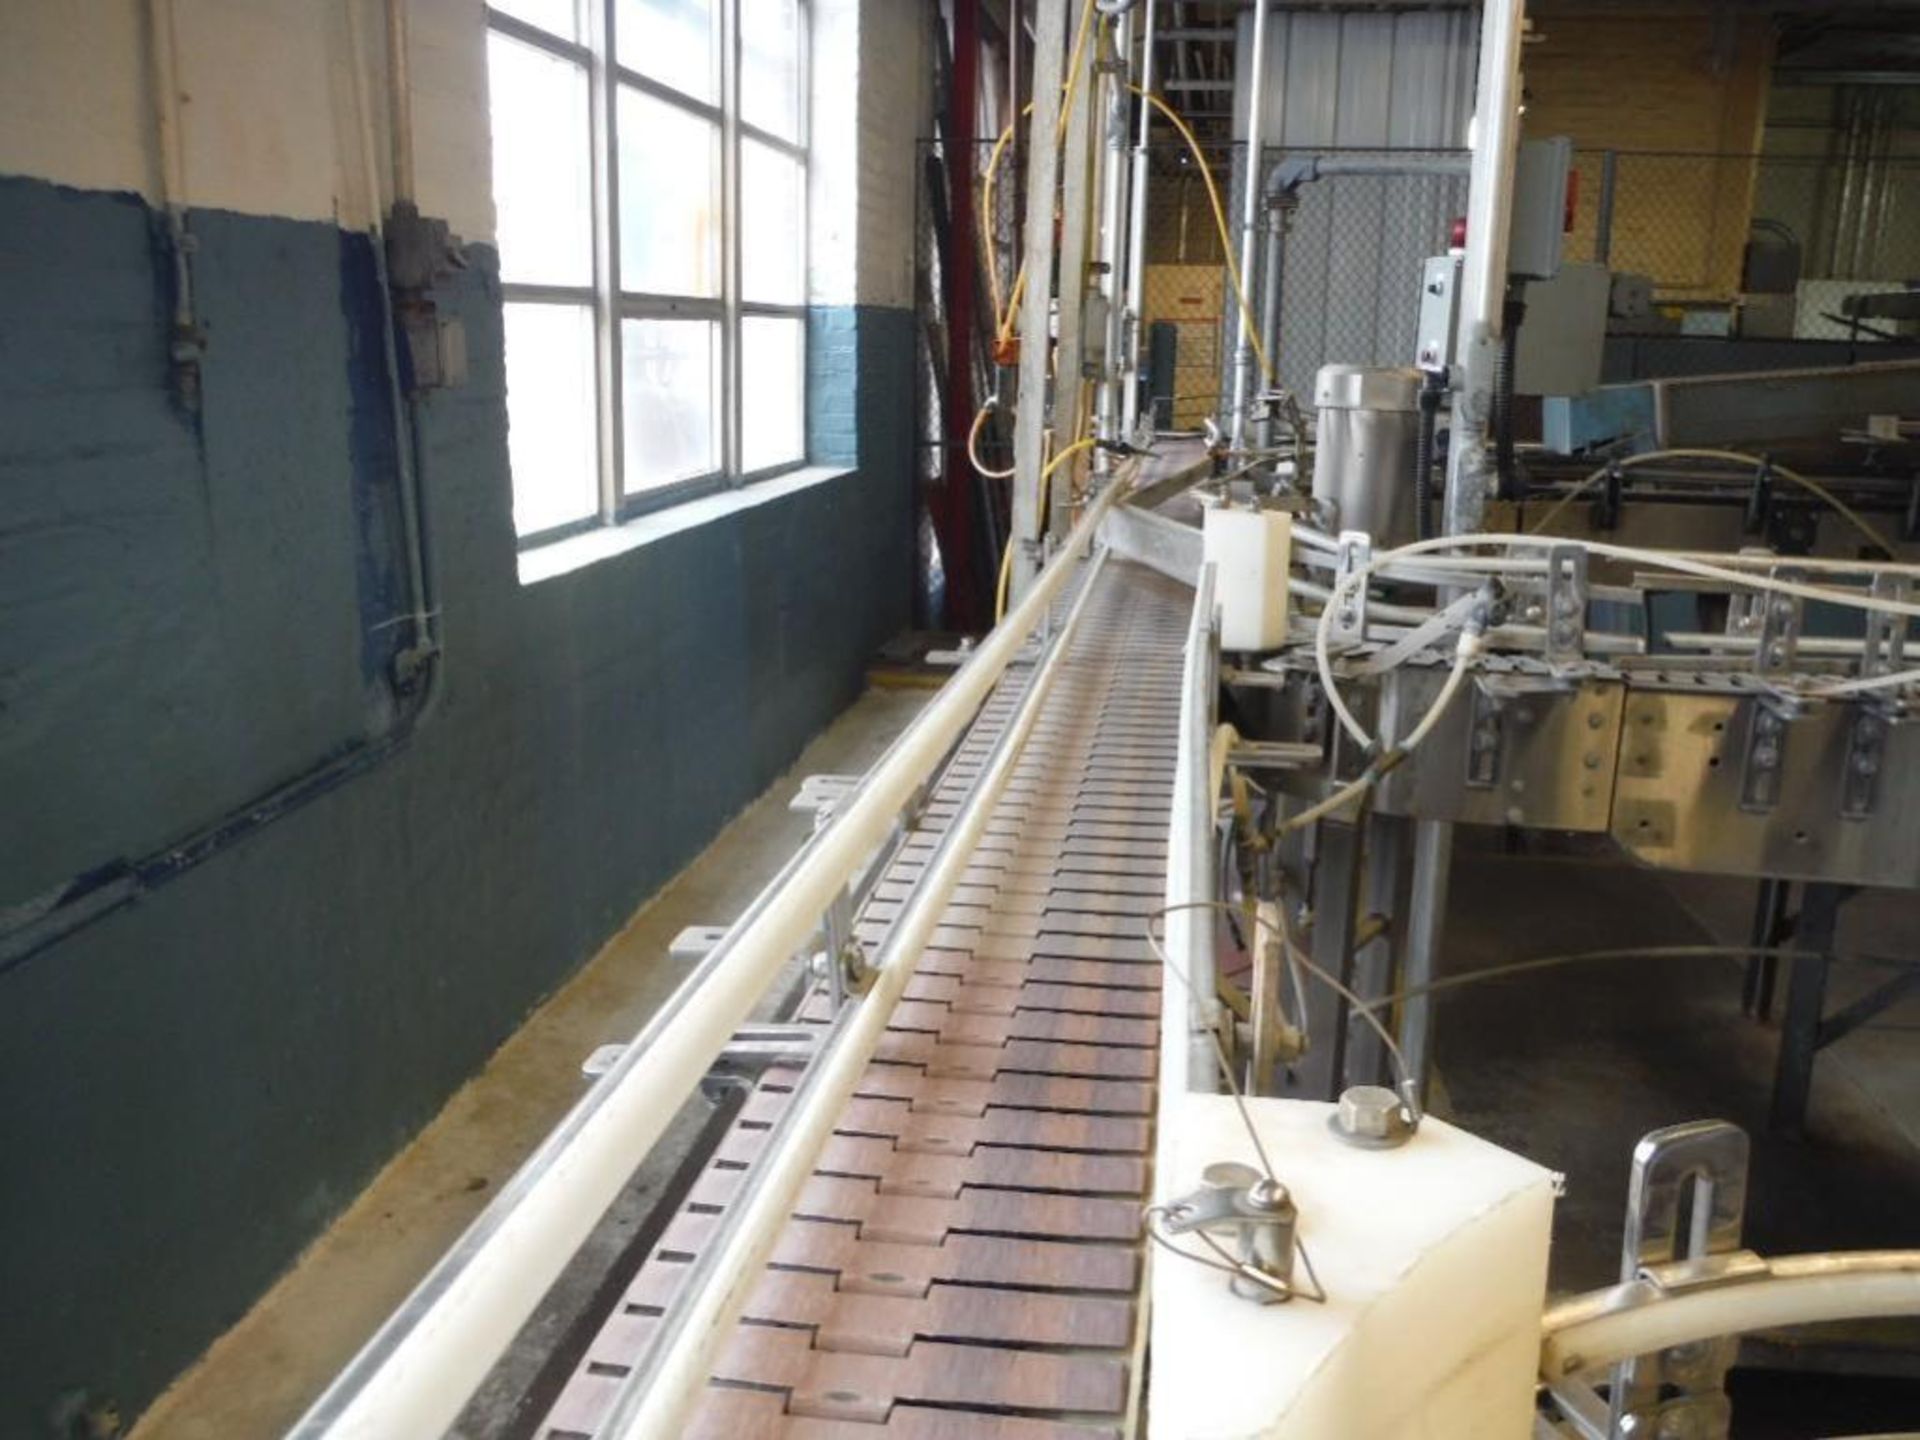 S.S. Table Top Power Conveyor, 22ft x 7 1/2in x 40in tall - NO BELT  Rigging Fee: $250 - Image 2 of 4